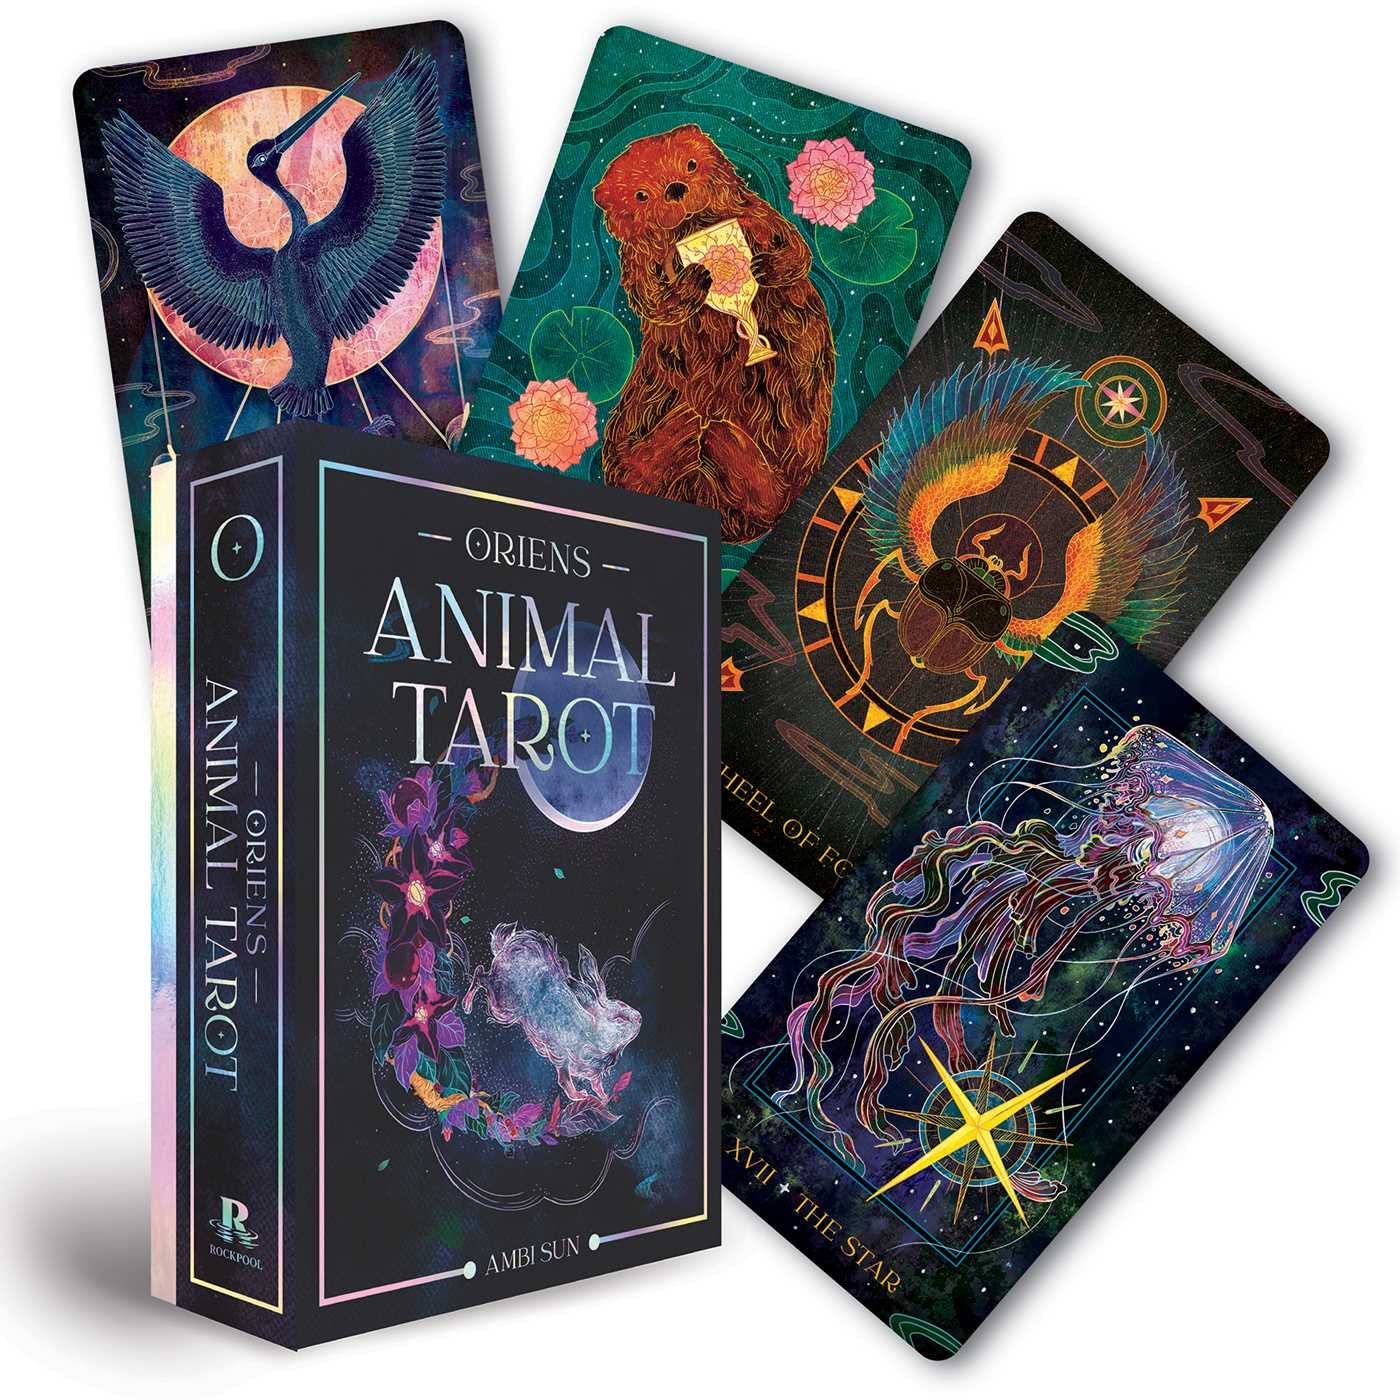 May Sell Out Soon! Orien's Animal Tarot: 78 Card Deck and 144 Page Book - Up to 27% Off!